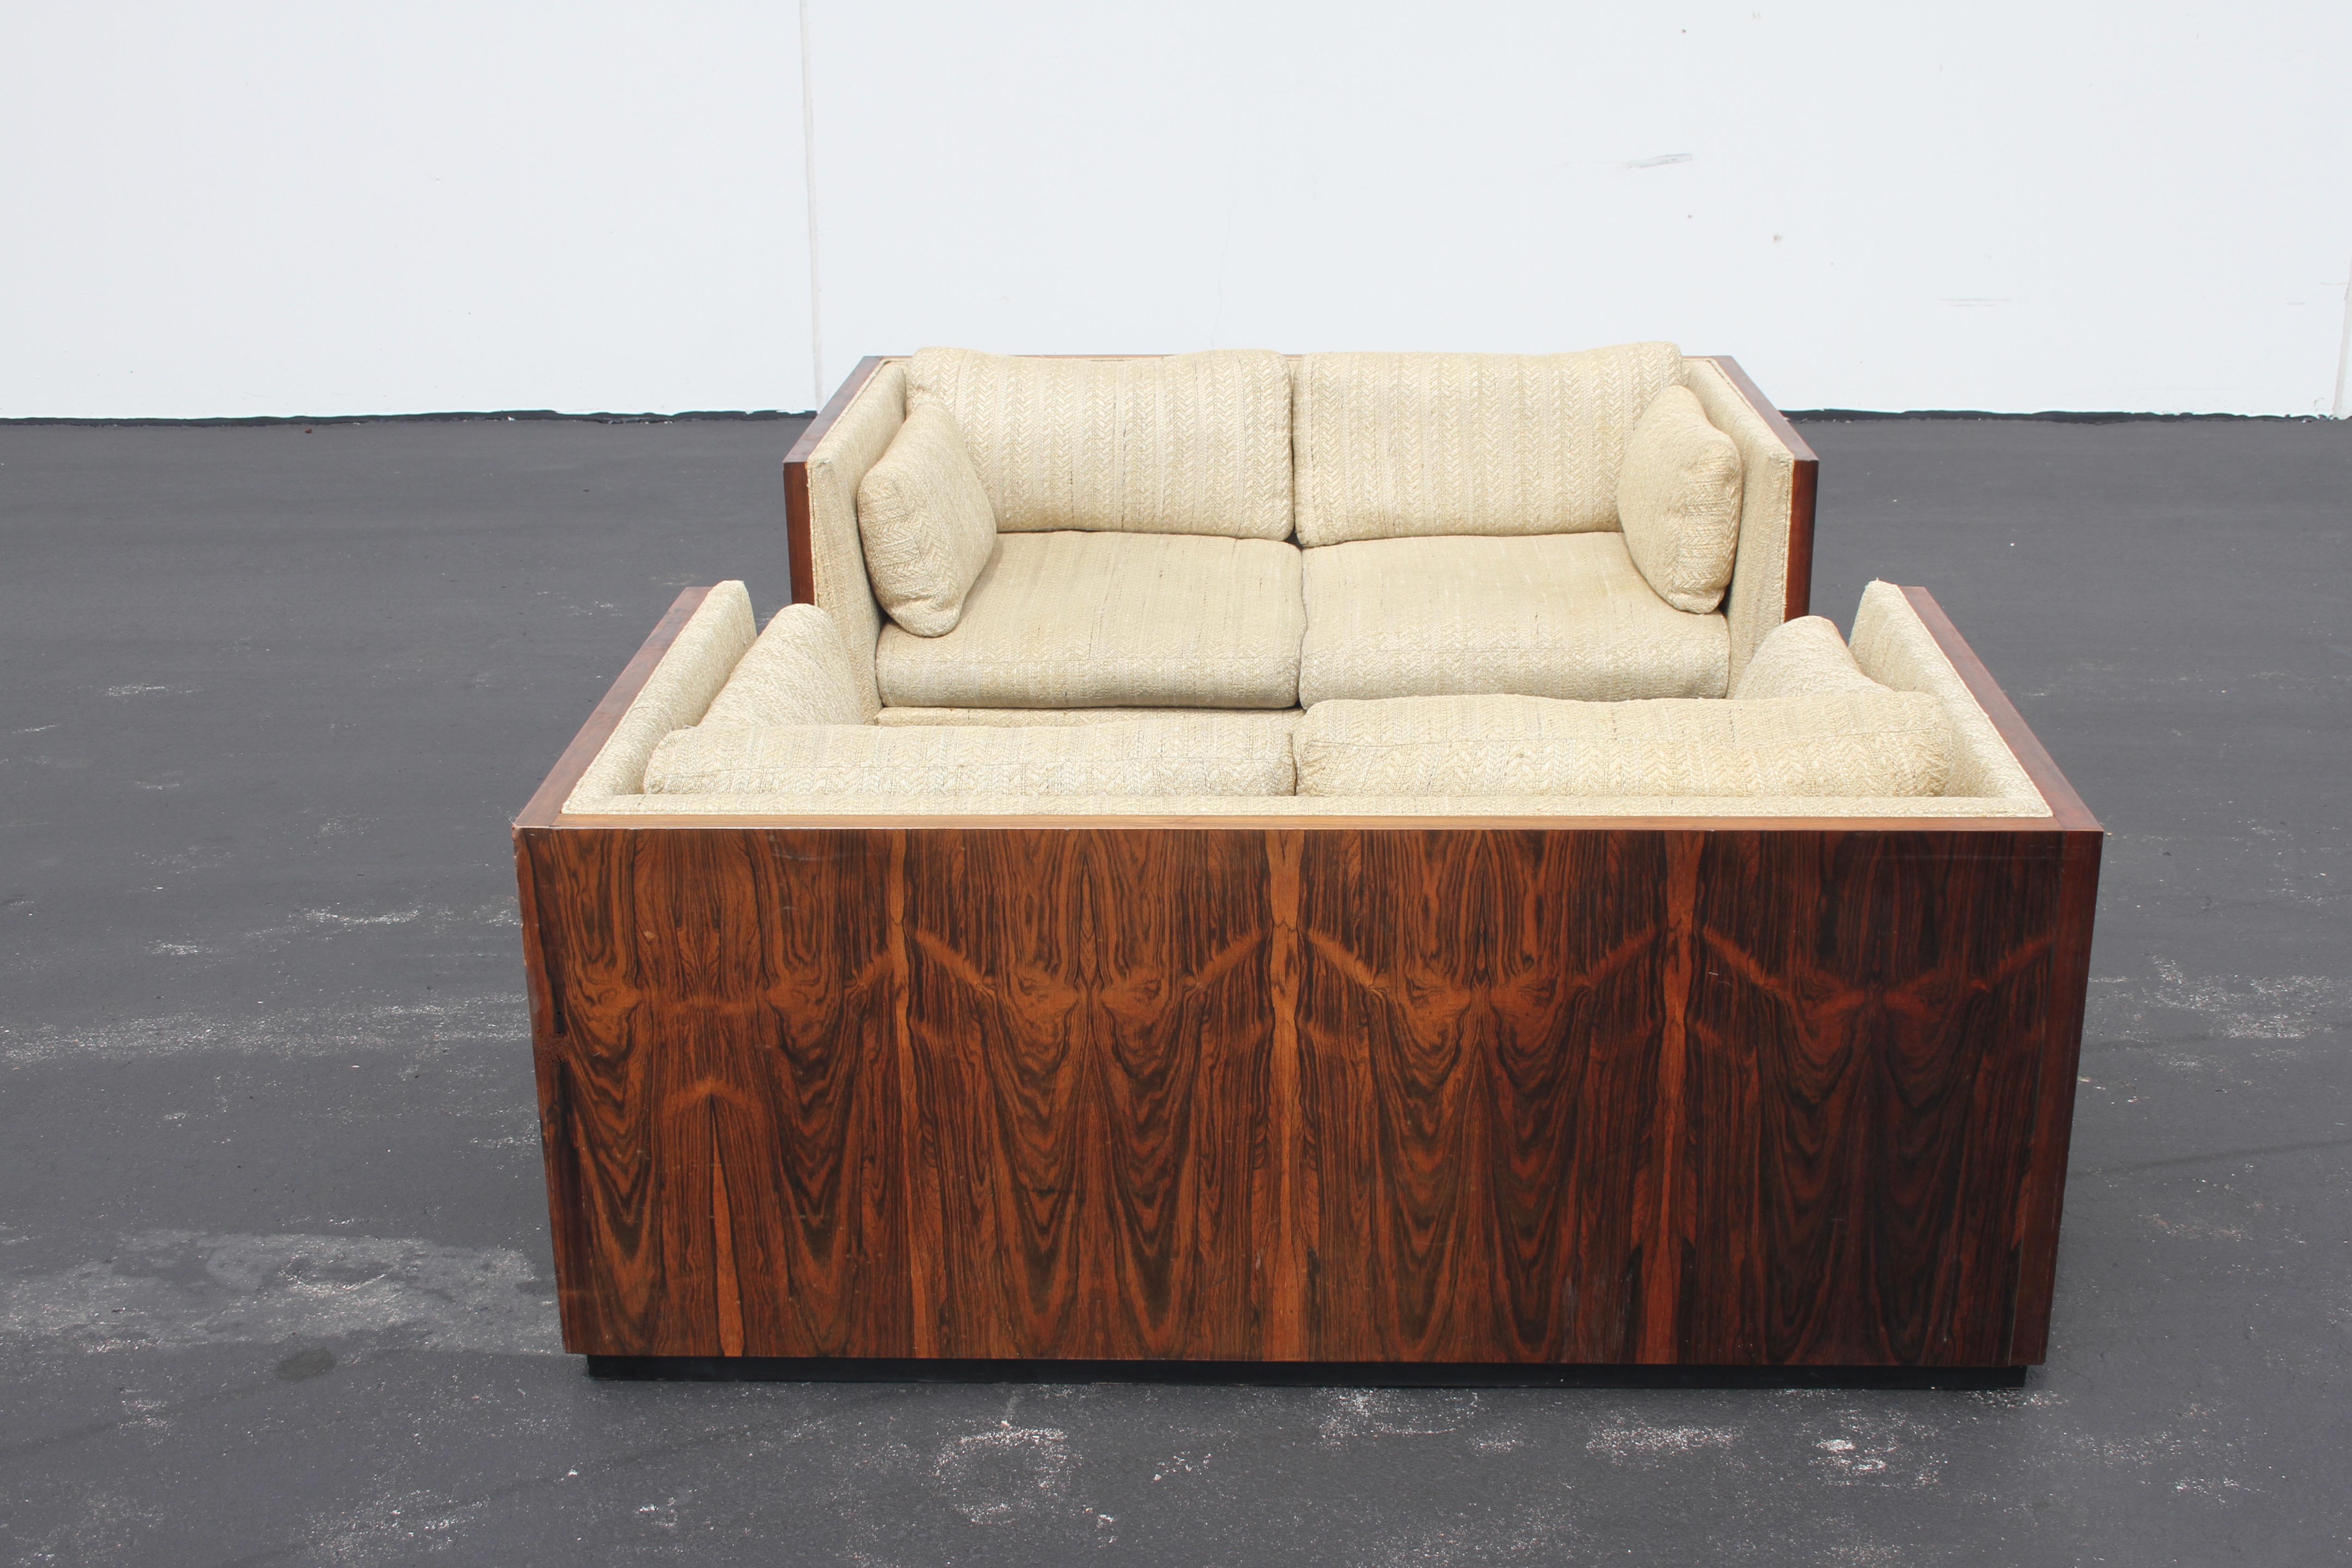 Pair of Milo Baughman for Thayer-Coggin Rosewood Settees, Loveseats or Sofas 6